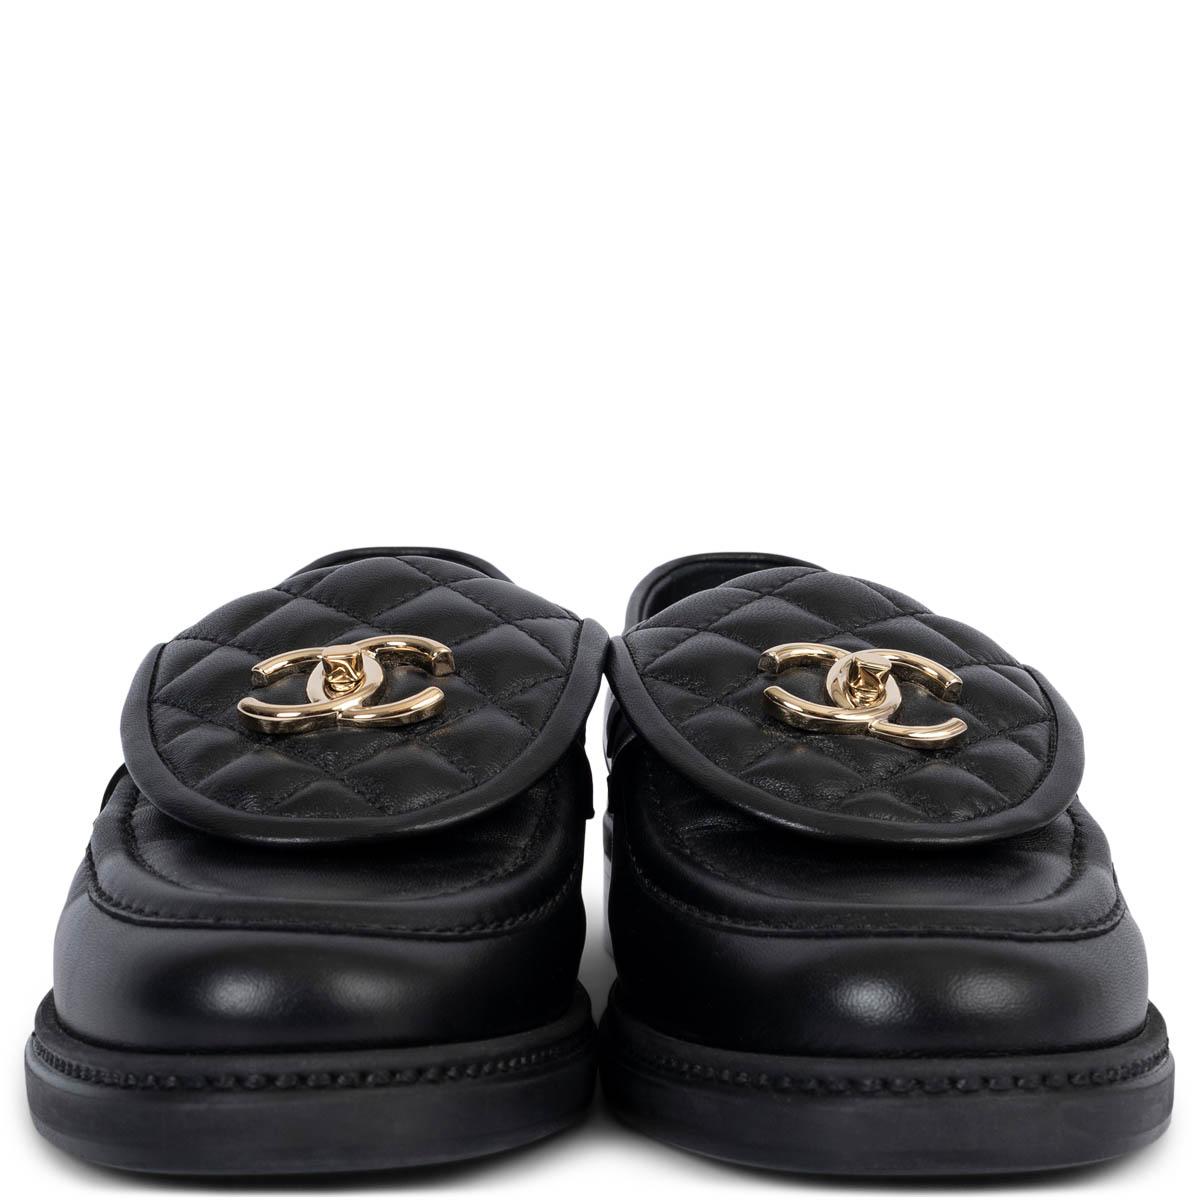 100% authentic Chanel REV turnlock loafers in black smooth leather with quilted flap and beige gold-tone metal CC  logo.  Have been worn once inside and are in virtually new condition. 

Measurements
Model	REV G36646 
Imprinted Size	39
Shoe